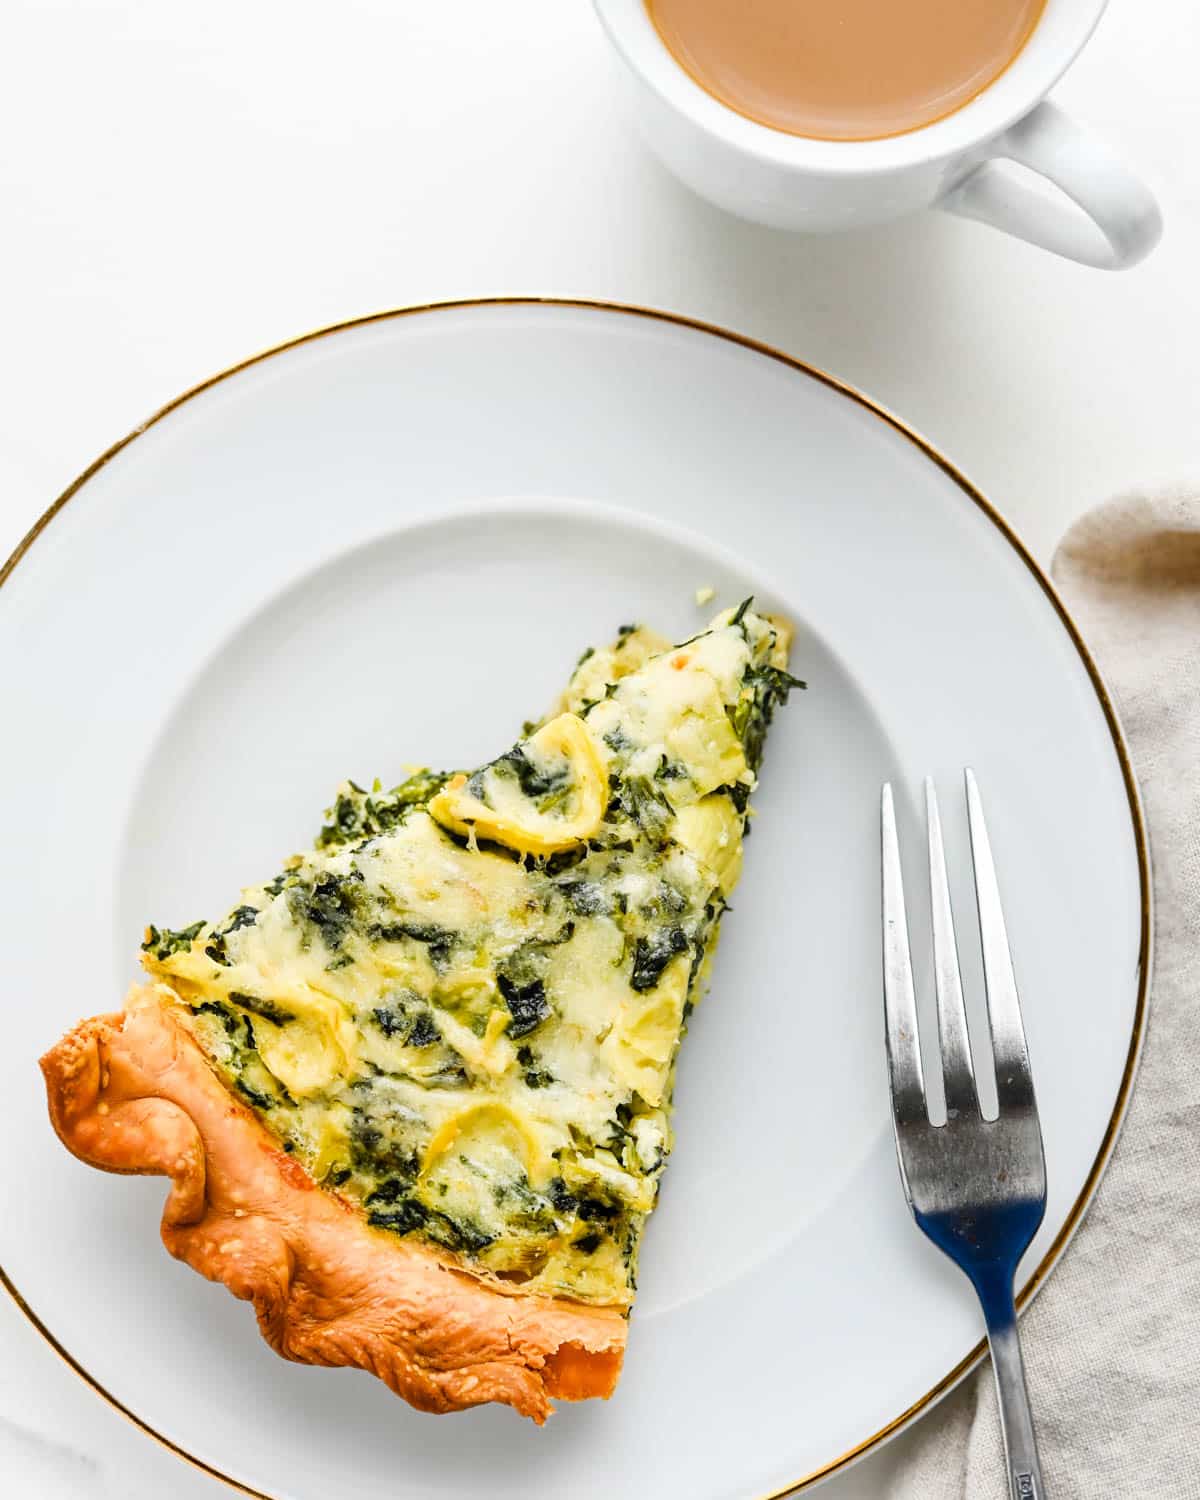 Serving a slice of spinach artichoke quiche with a cup of coffee for brunch.